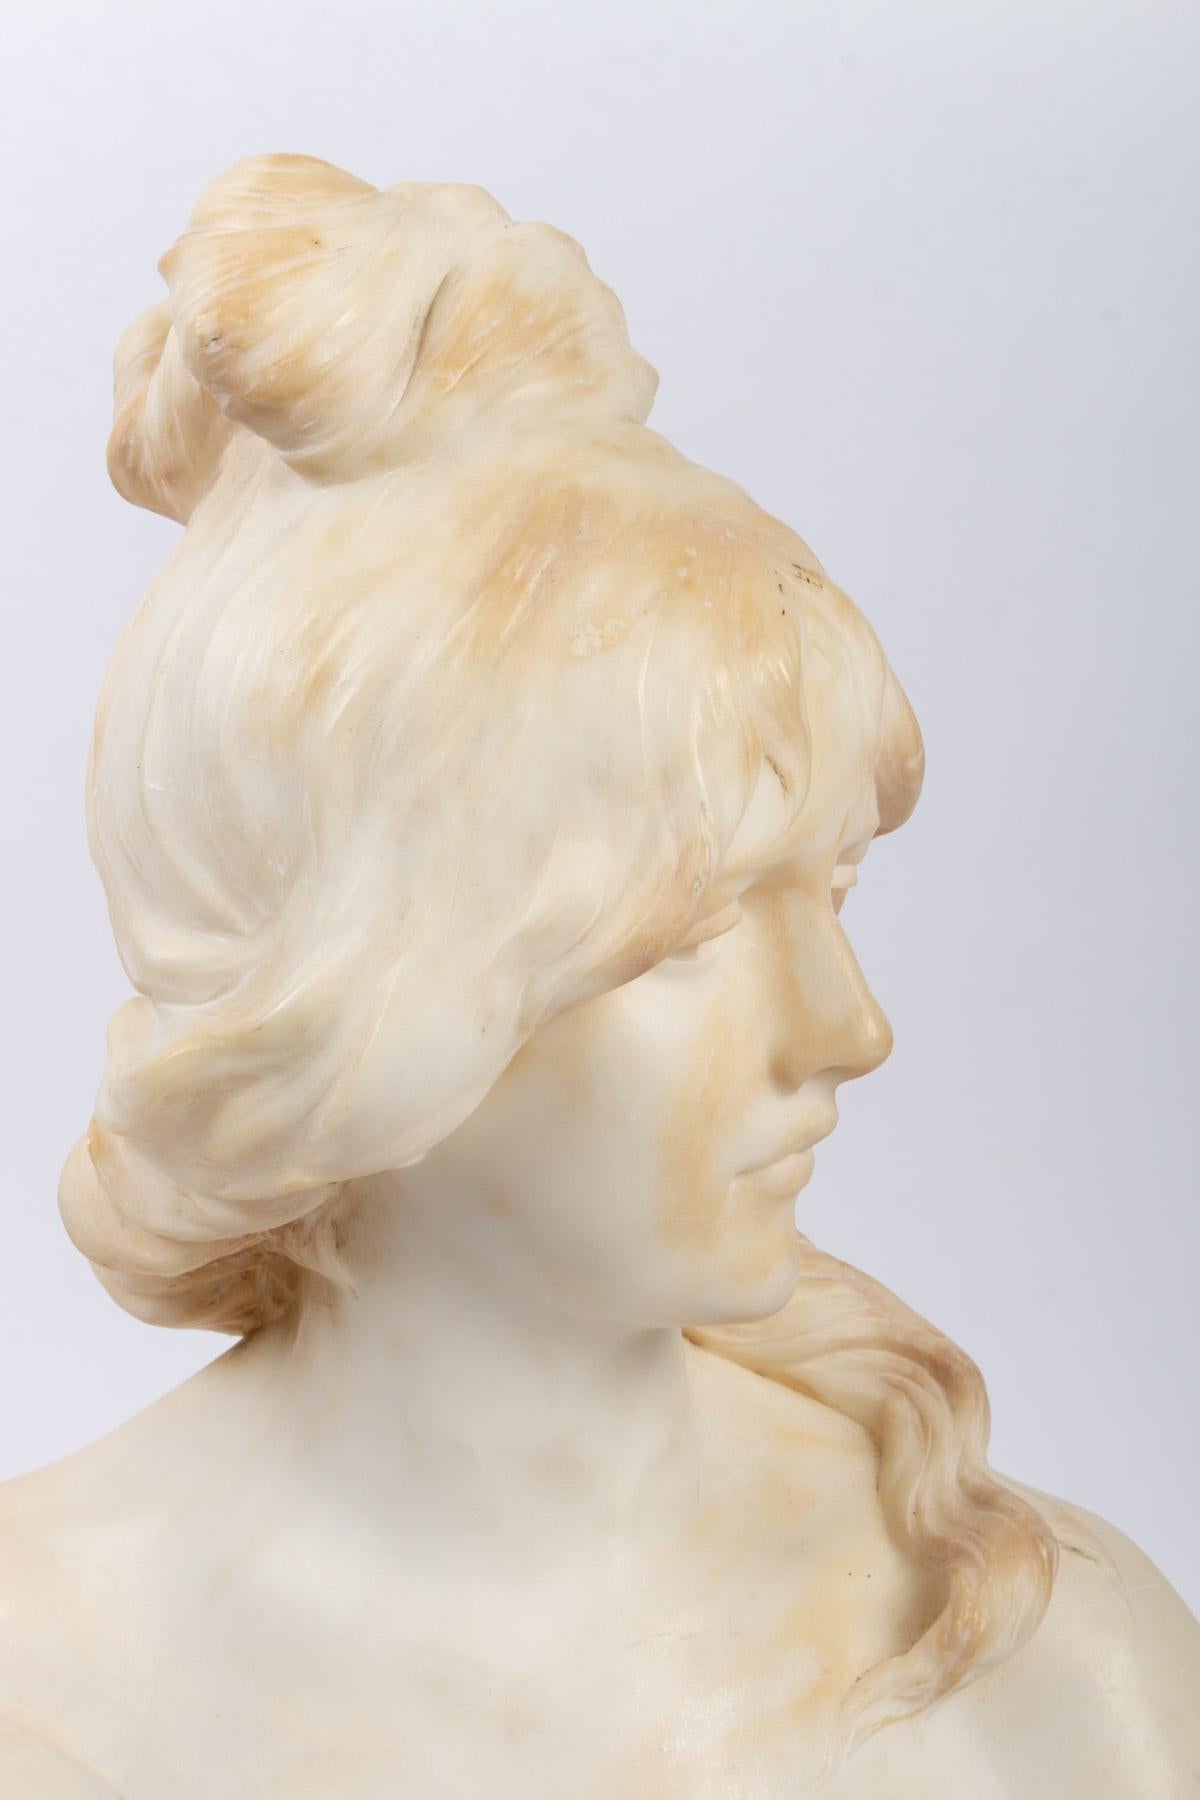 Art Nouveau female bust in alabaster, Socle composed of two blocks of alabaster, unsigned.
Measures: H 51 cm, W 30 cm, D 16 cm.